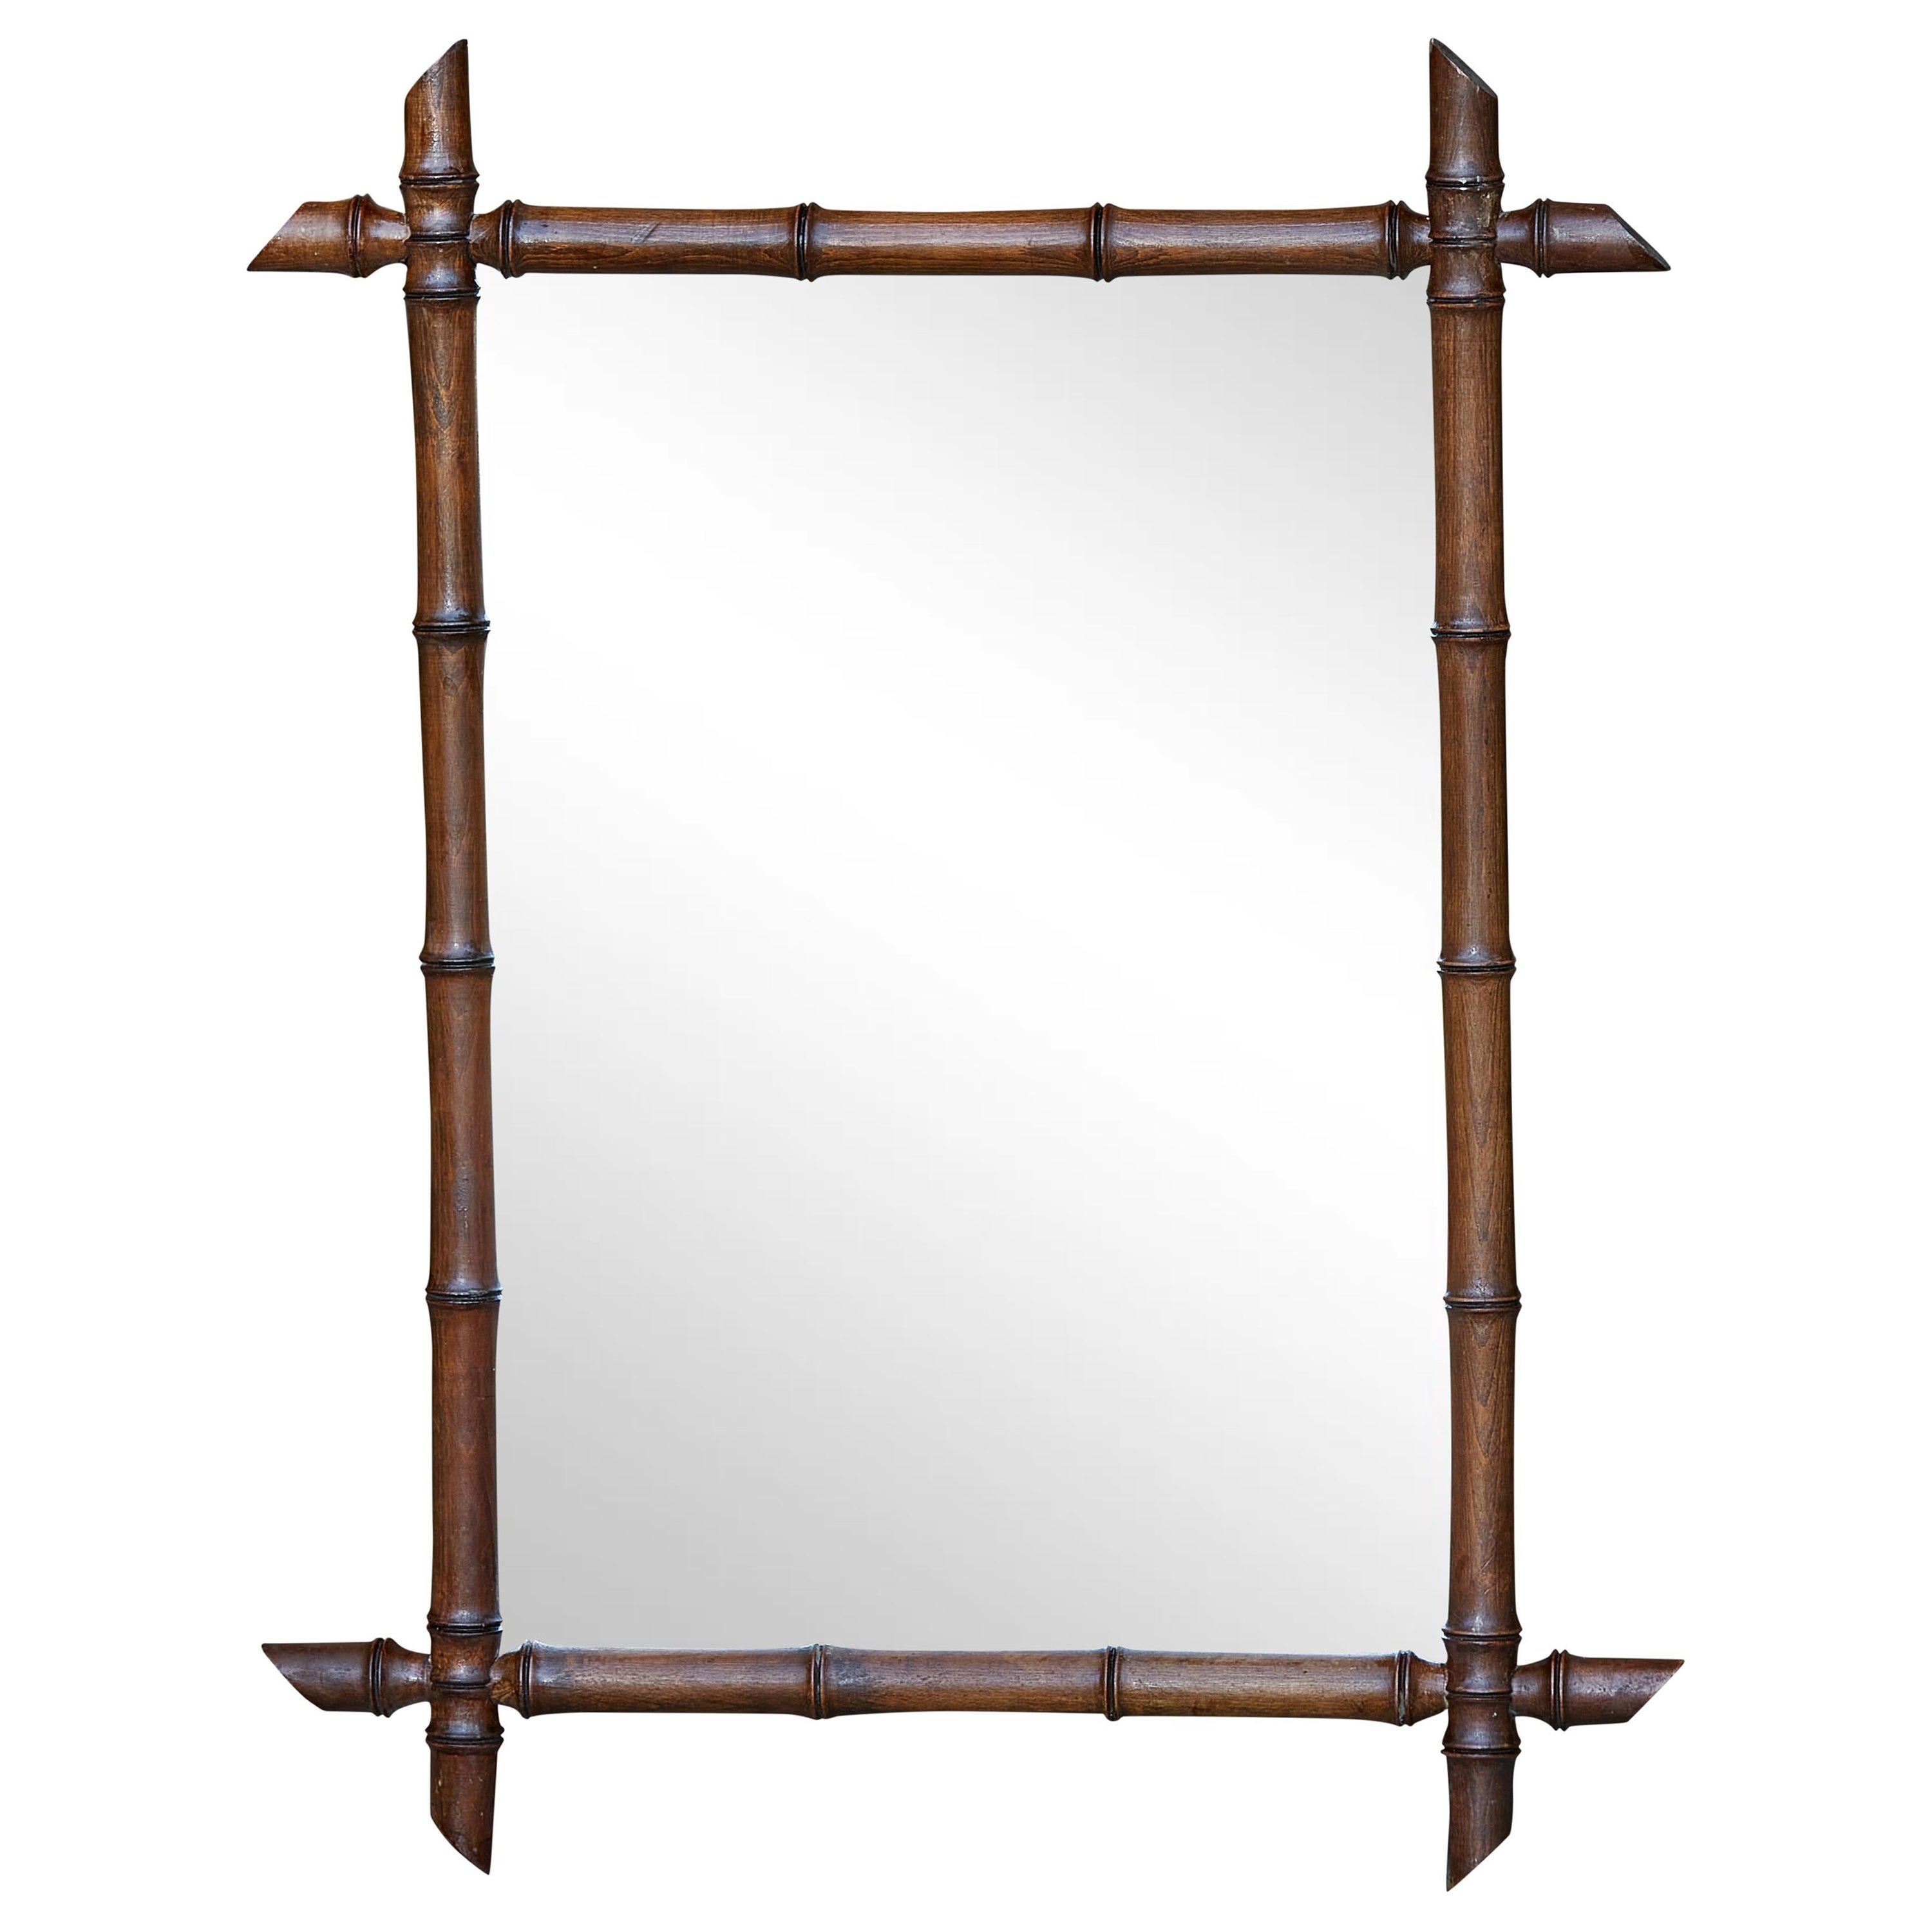 French Faux-Bamboo Turn of the Century Mirror with Dark Brown Patina, circa 1900